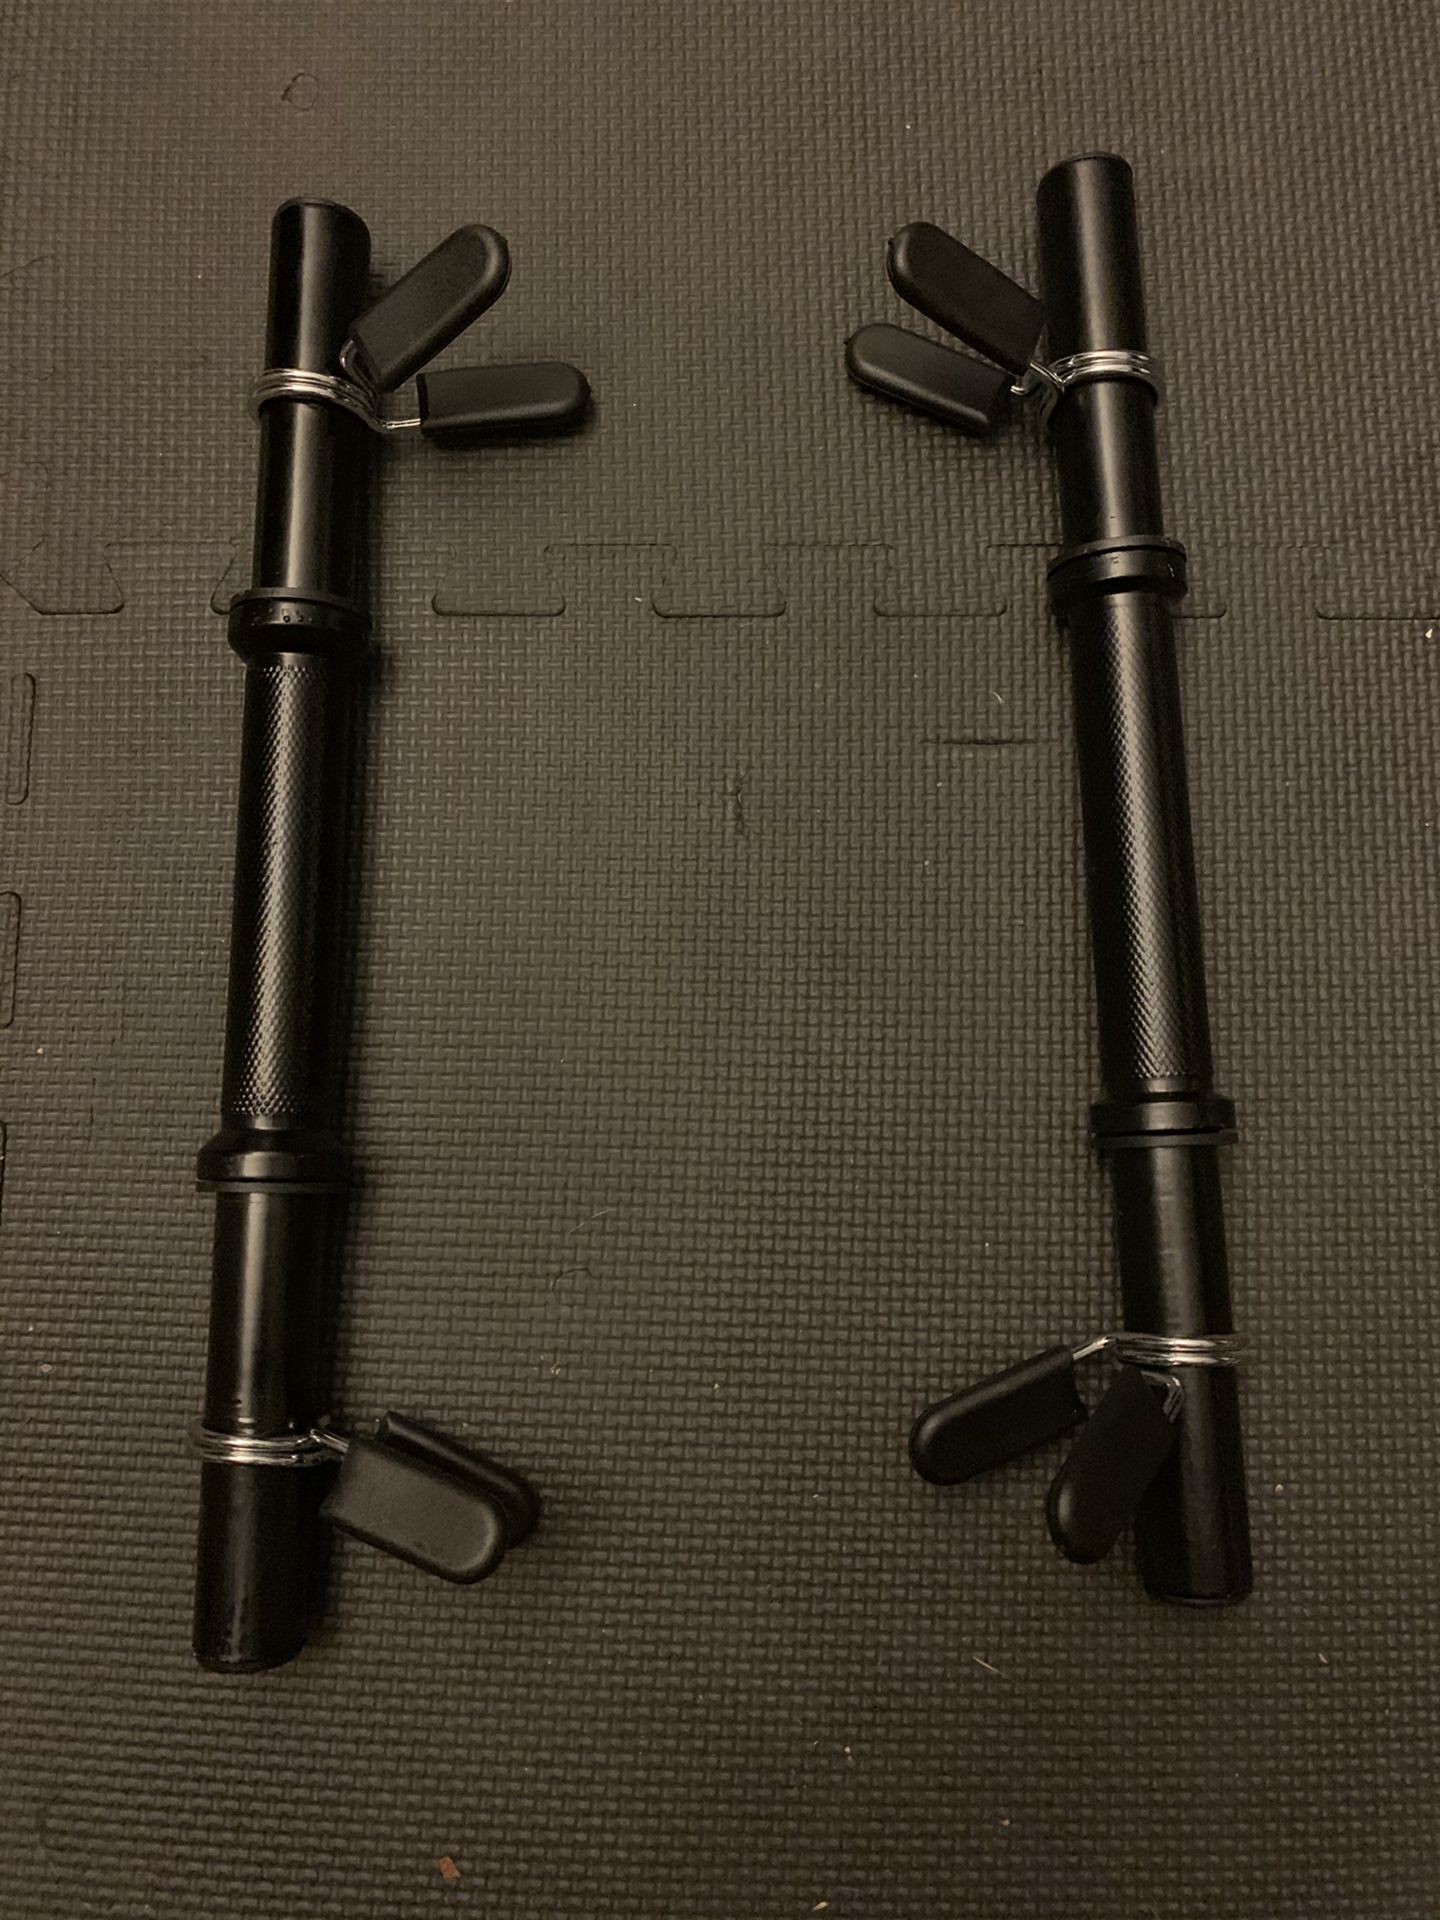 NEVER used 1” standard dumbbell handles with clamps/collars $35 or best offer